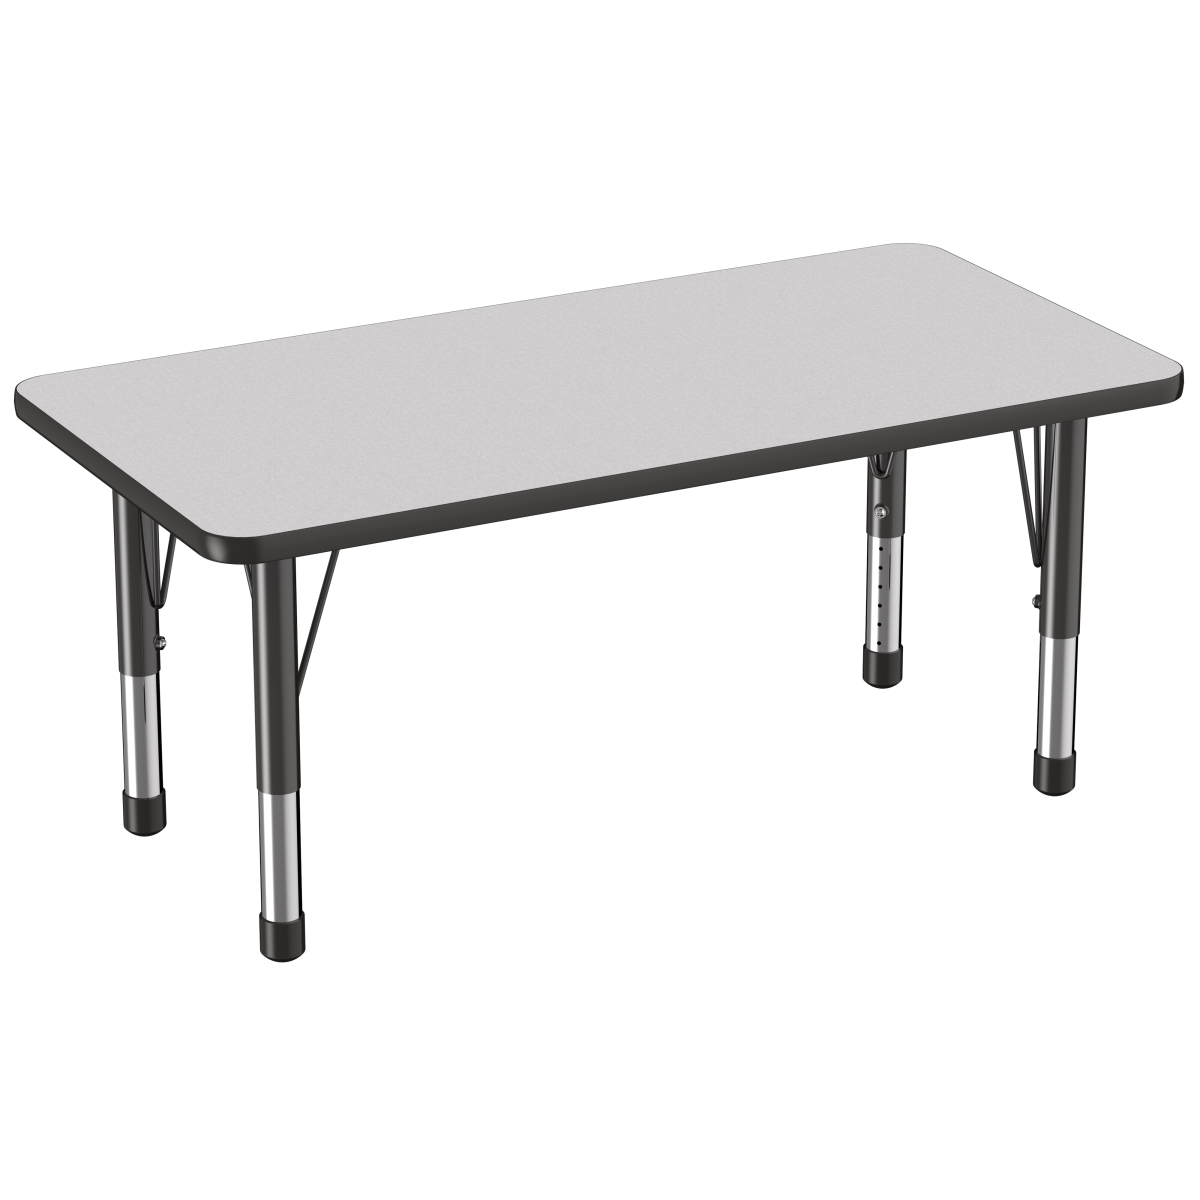 10009-gybk 24 X 48 In. Rectangle T-mold Adjustable Activity Table With Chunky Leg - Grey & Black